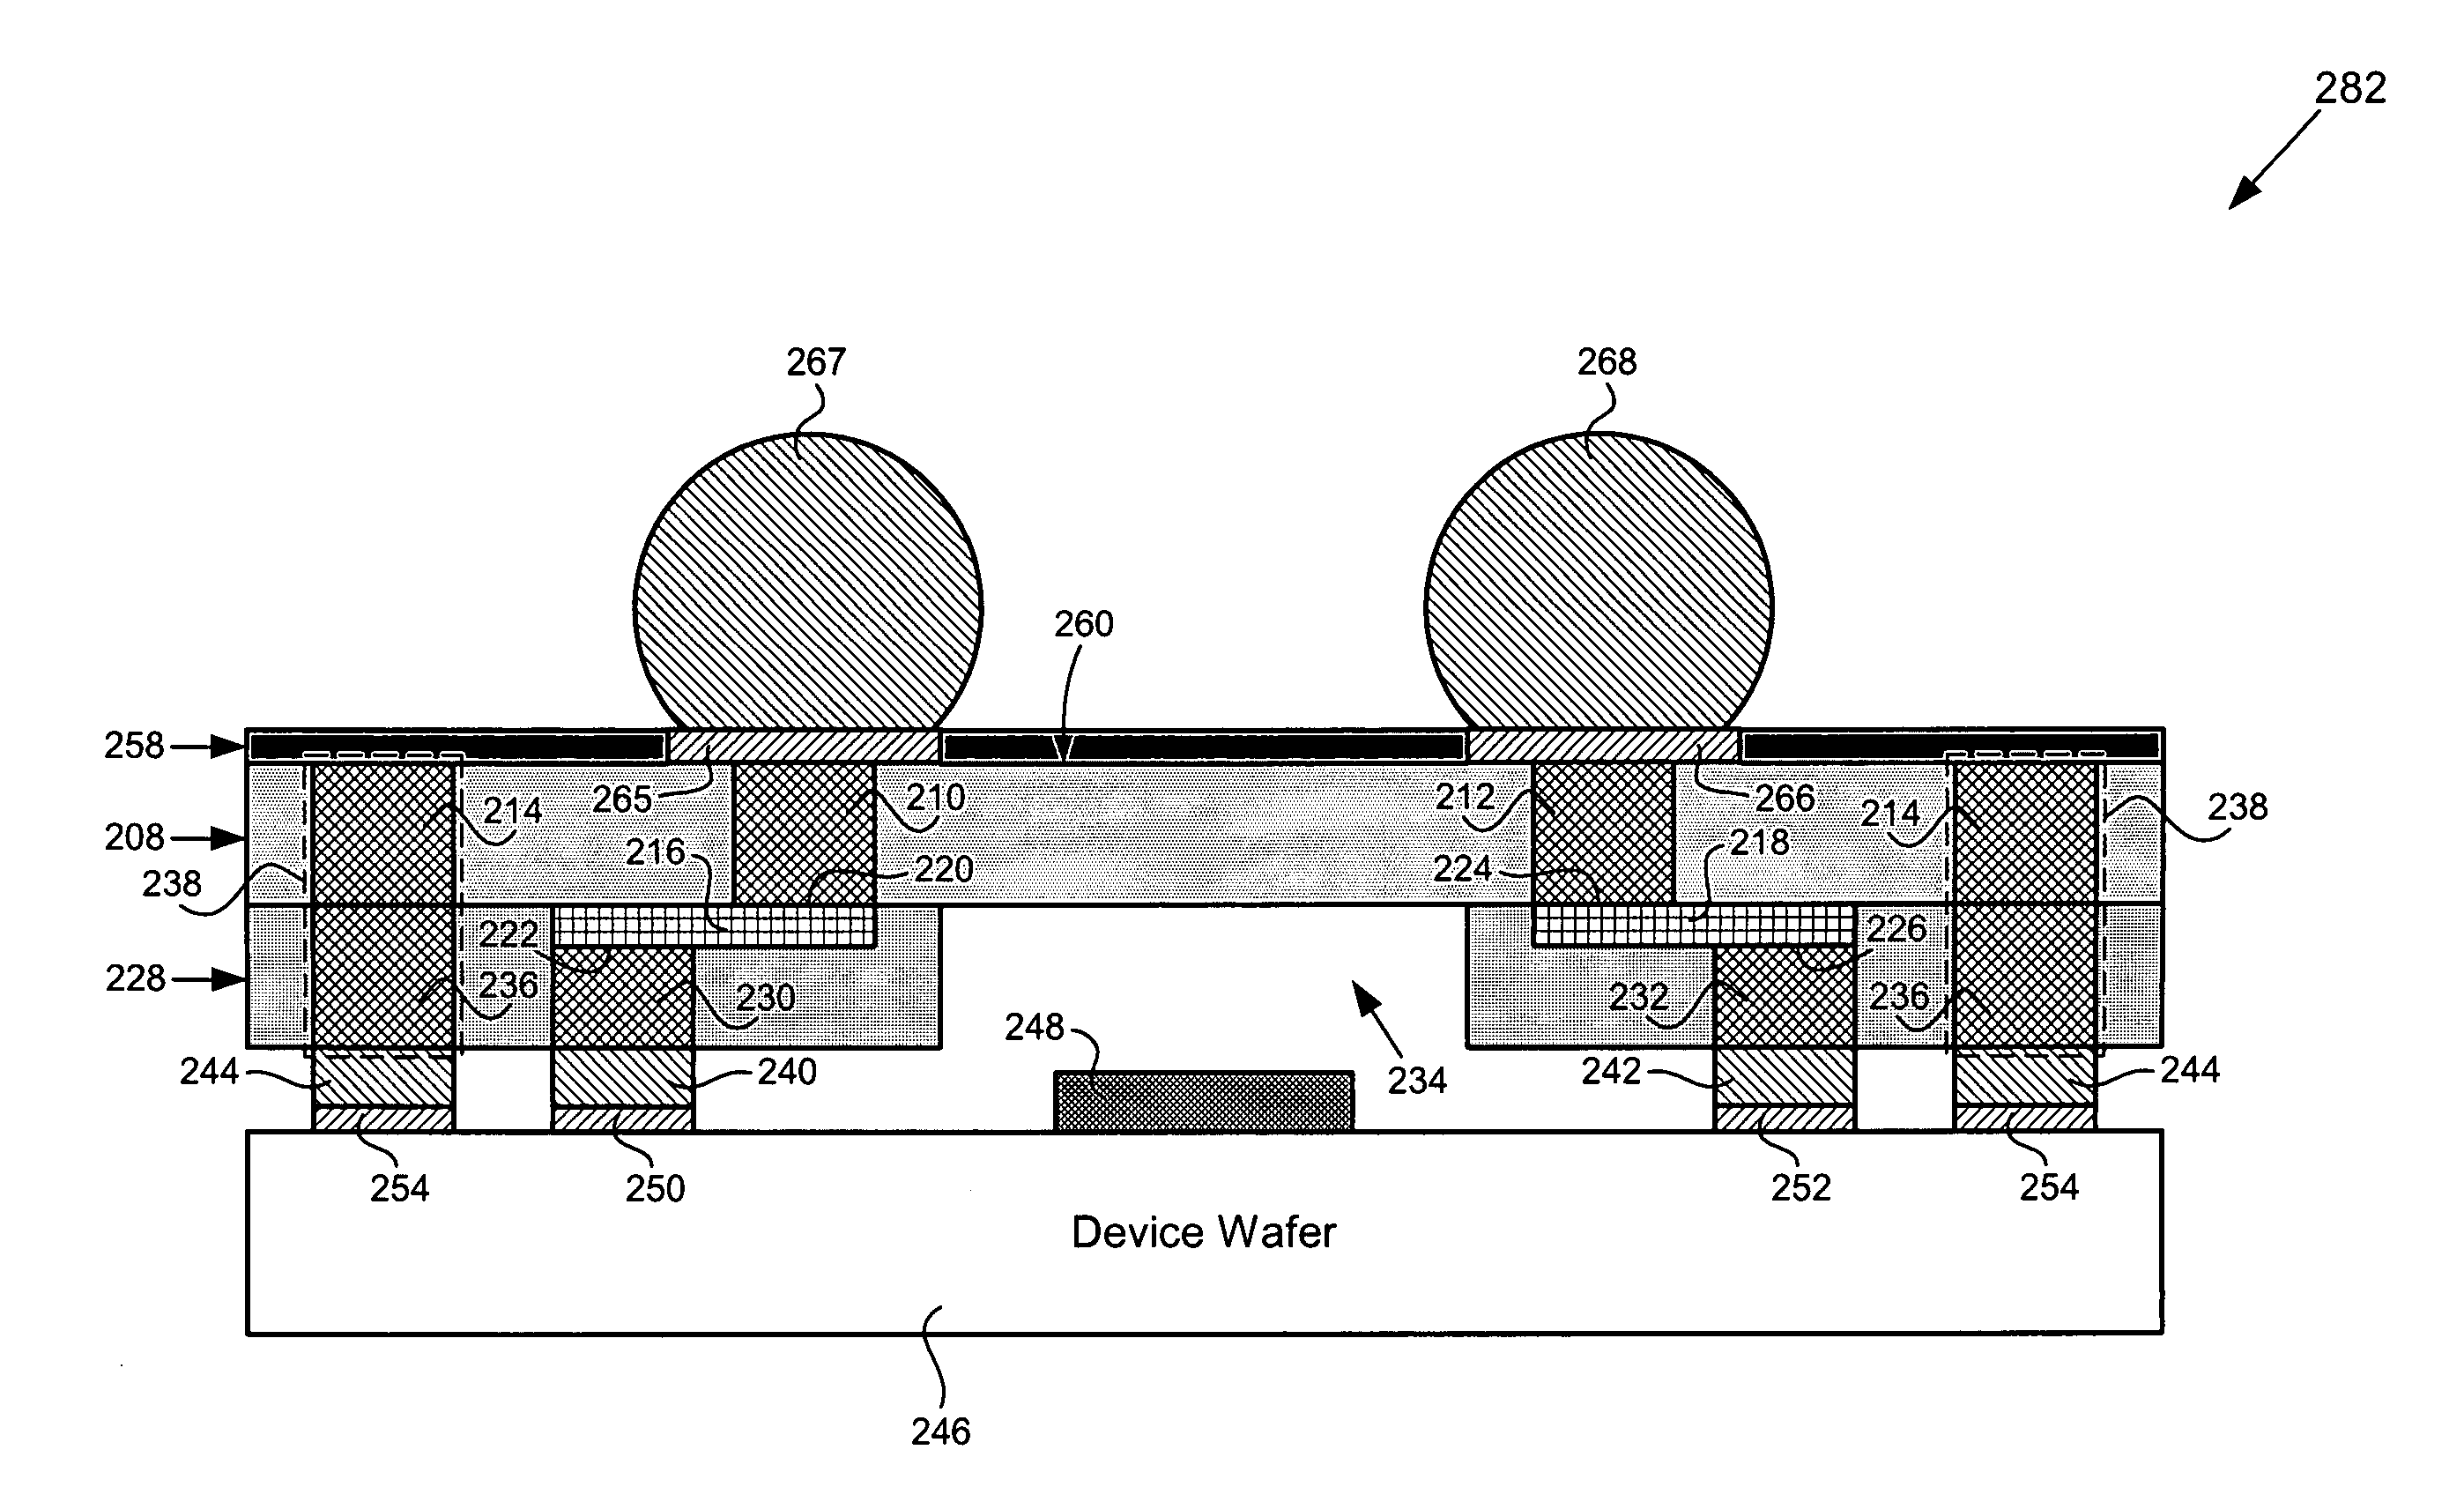 Wafer level package including a device wafer integrated with a passive component